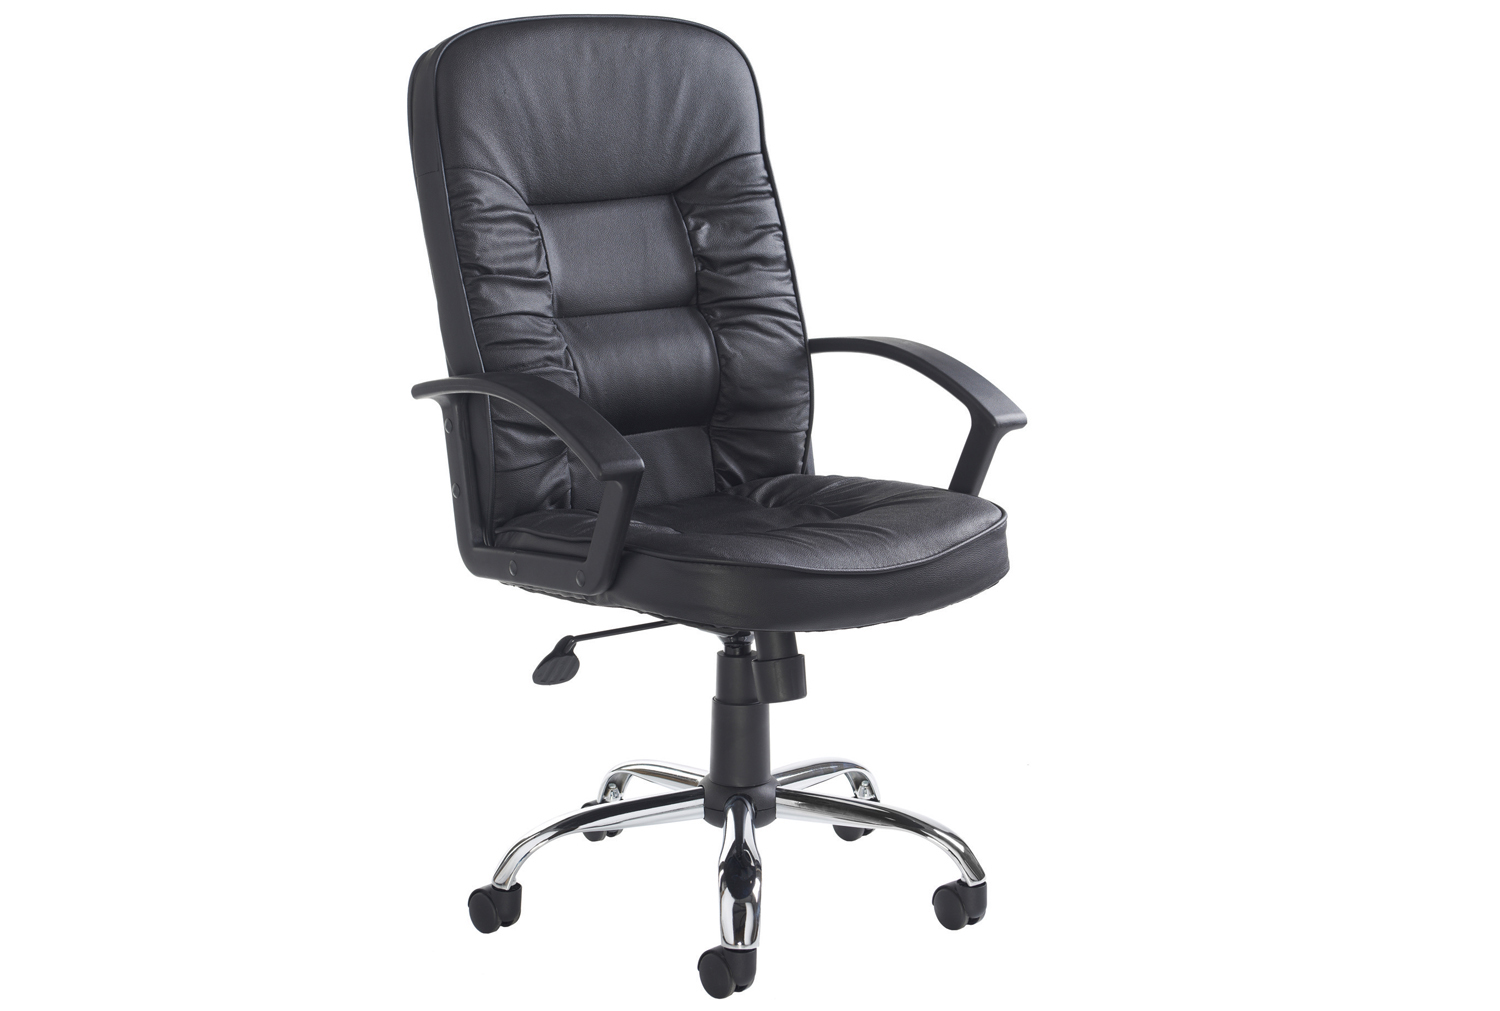 Cluedo High Back Leather Faced Executive Office Chair, Black, Fully Installed